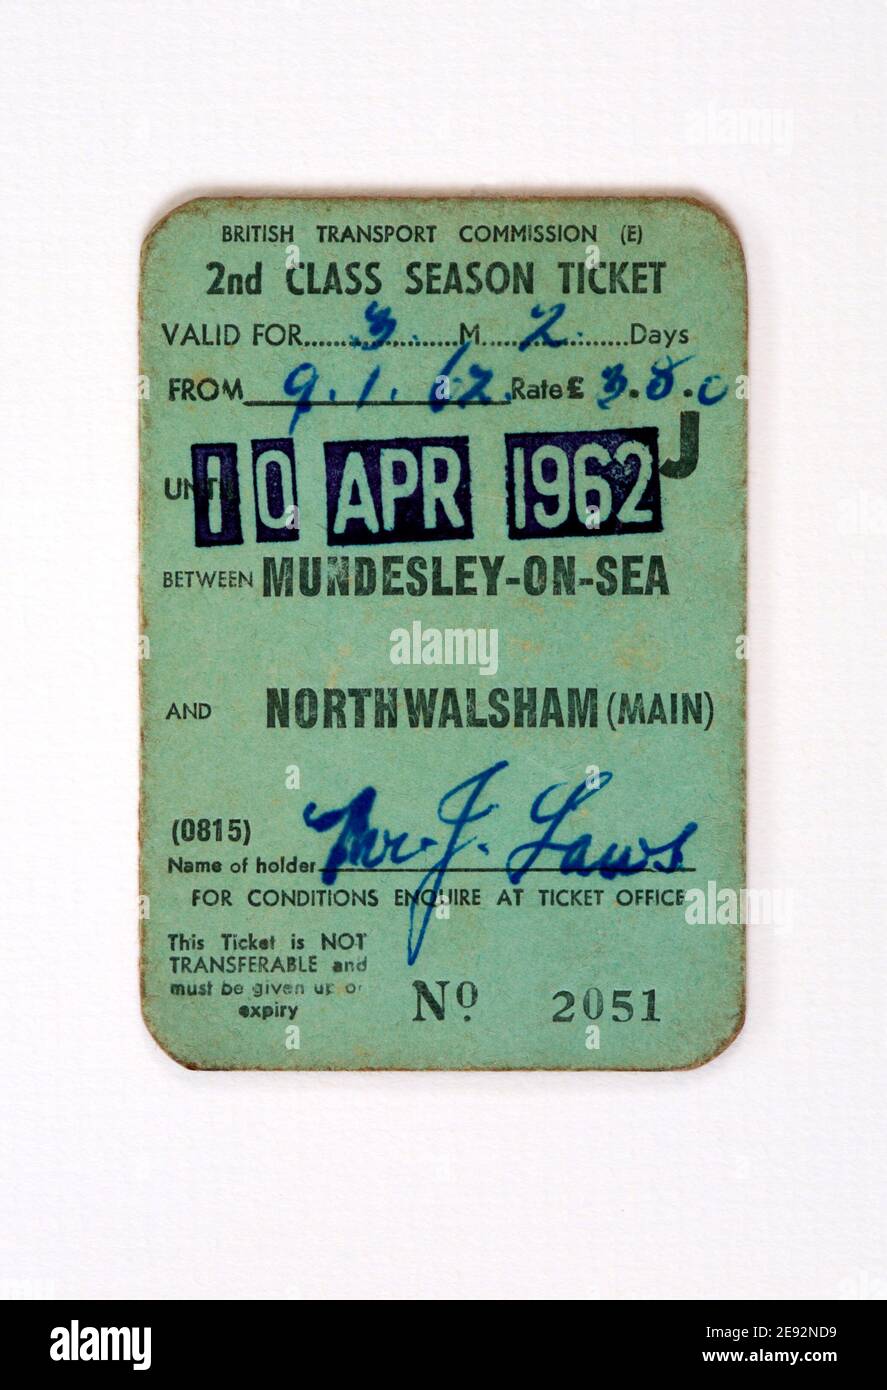 A 2nd Class Season Ticket used in 1962 on the former branch railway line between Mundesley-on-Sea and North Walsham (Main) in North Norfolk, UK. Stock Photo